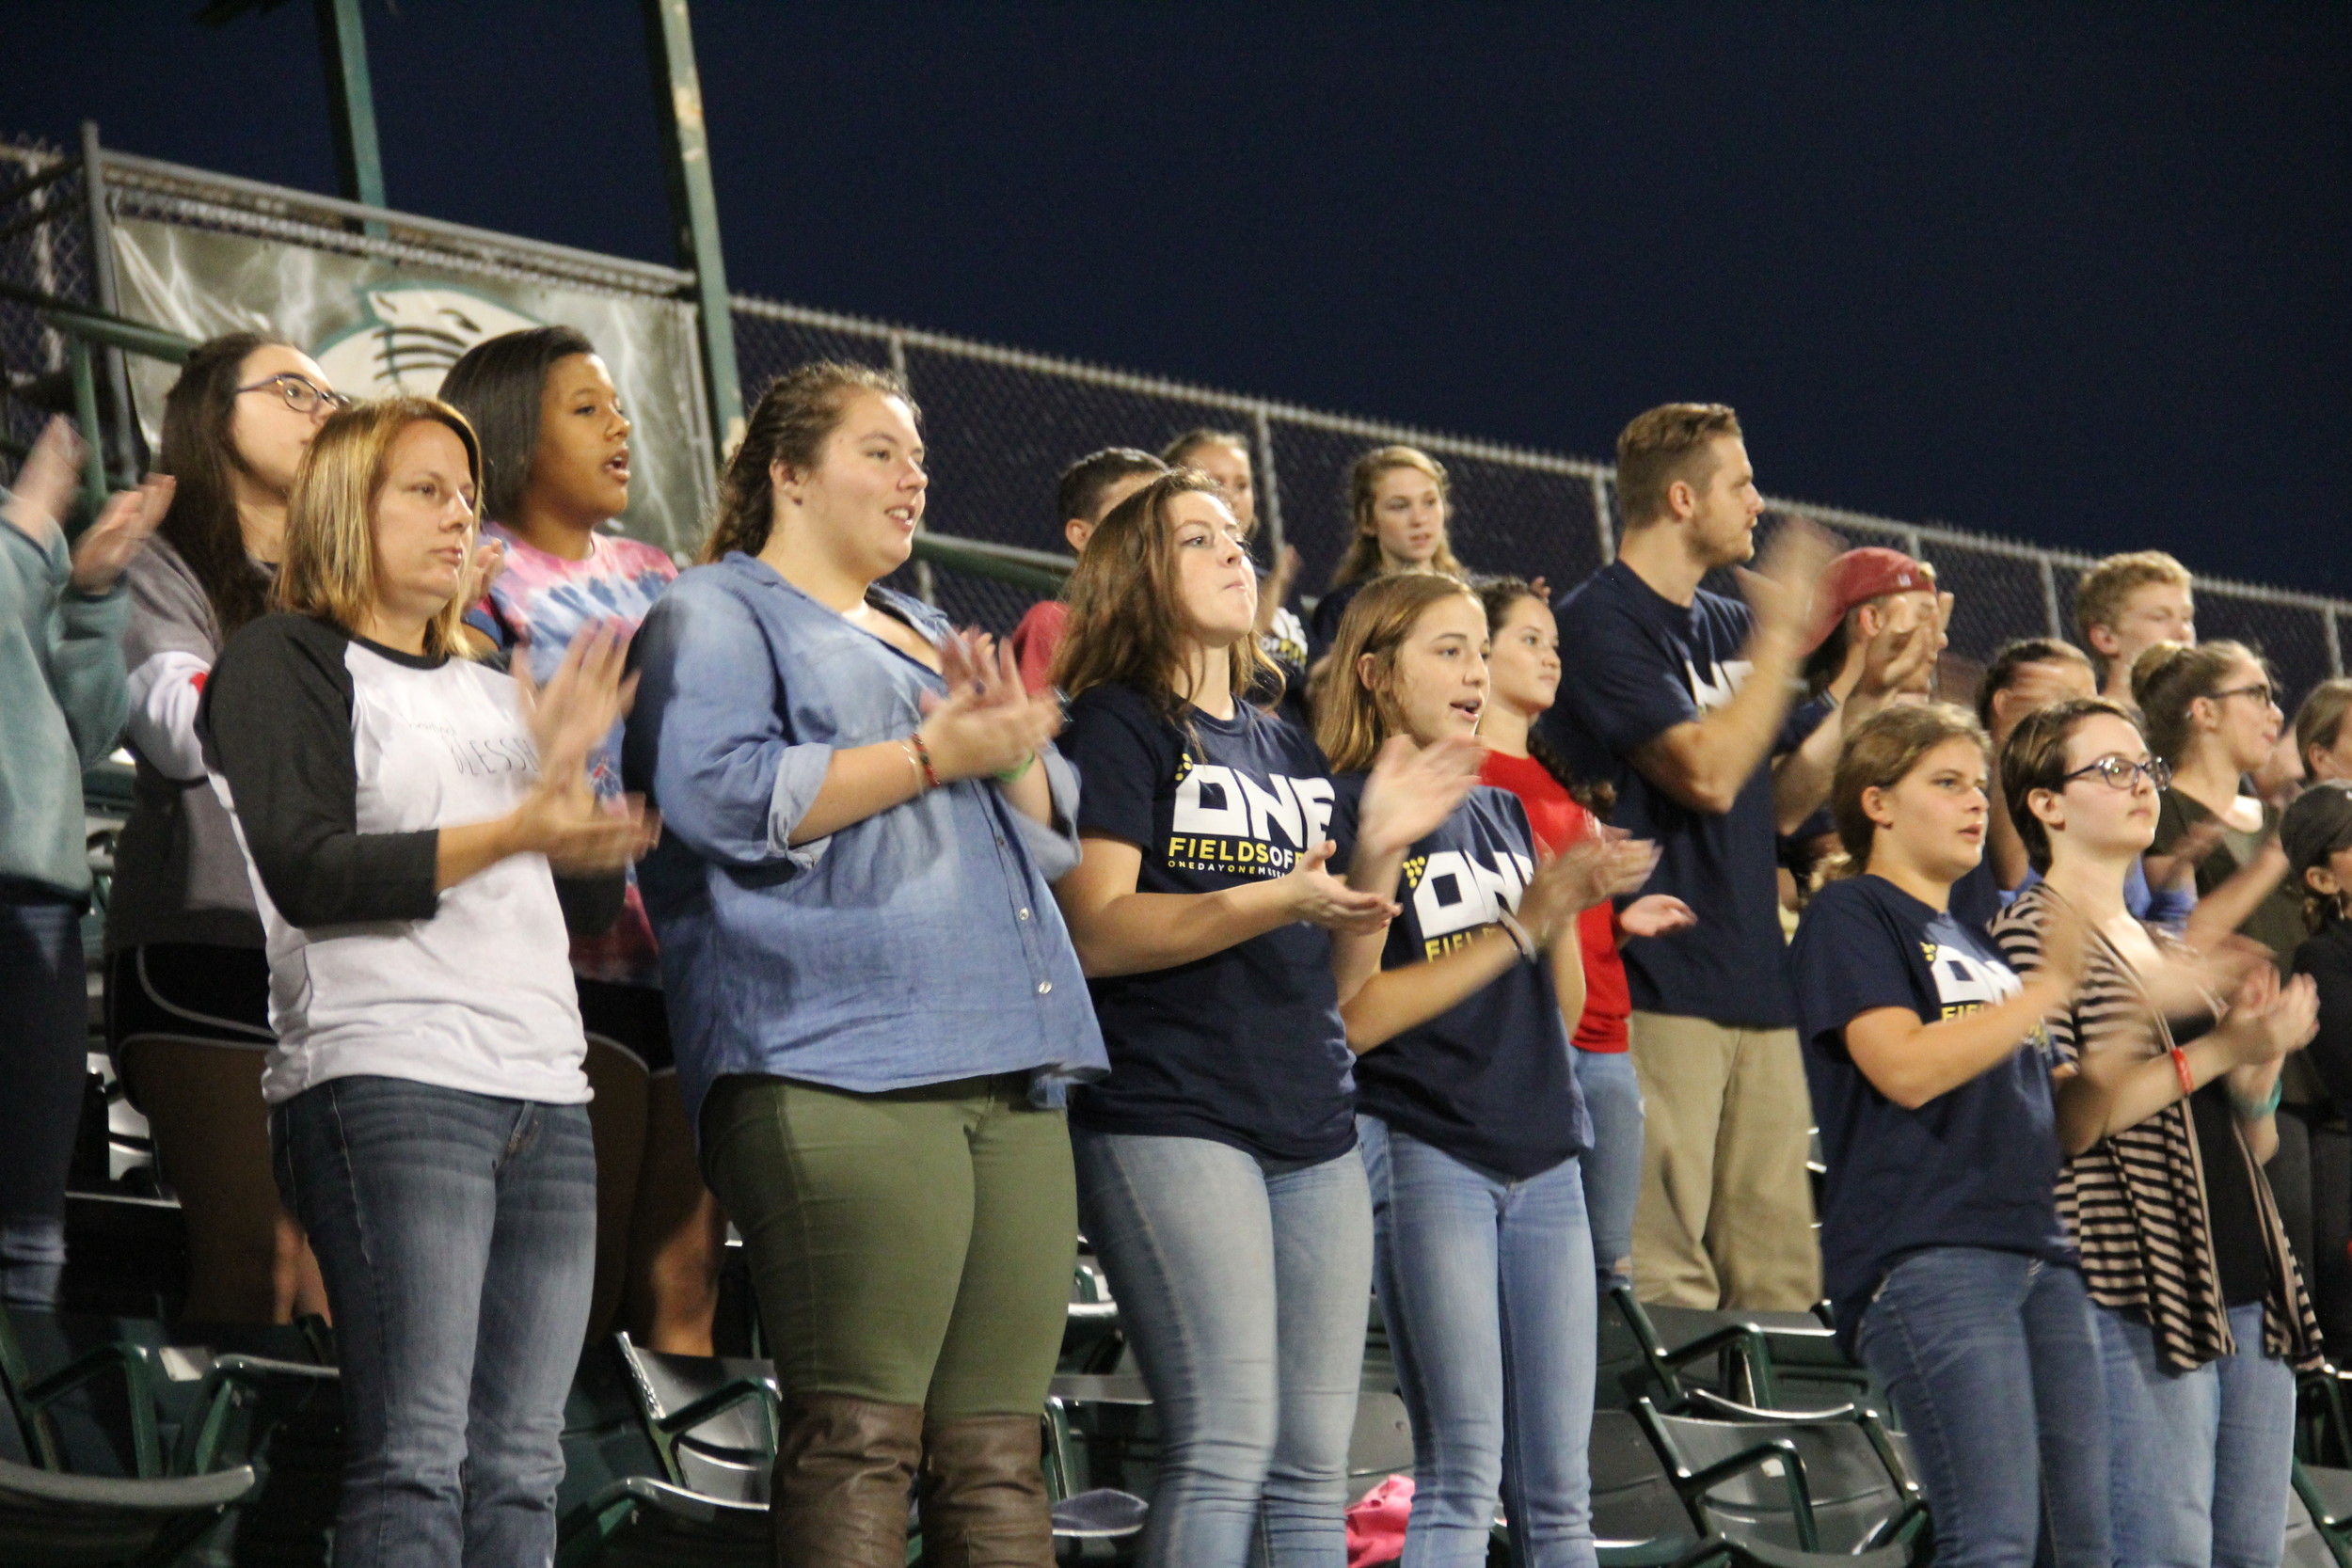 Local students participate in the Fields of Faith gathering held at the Nease High School stadium Nov. 1.